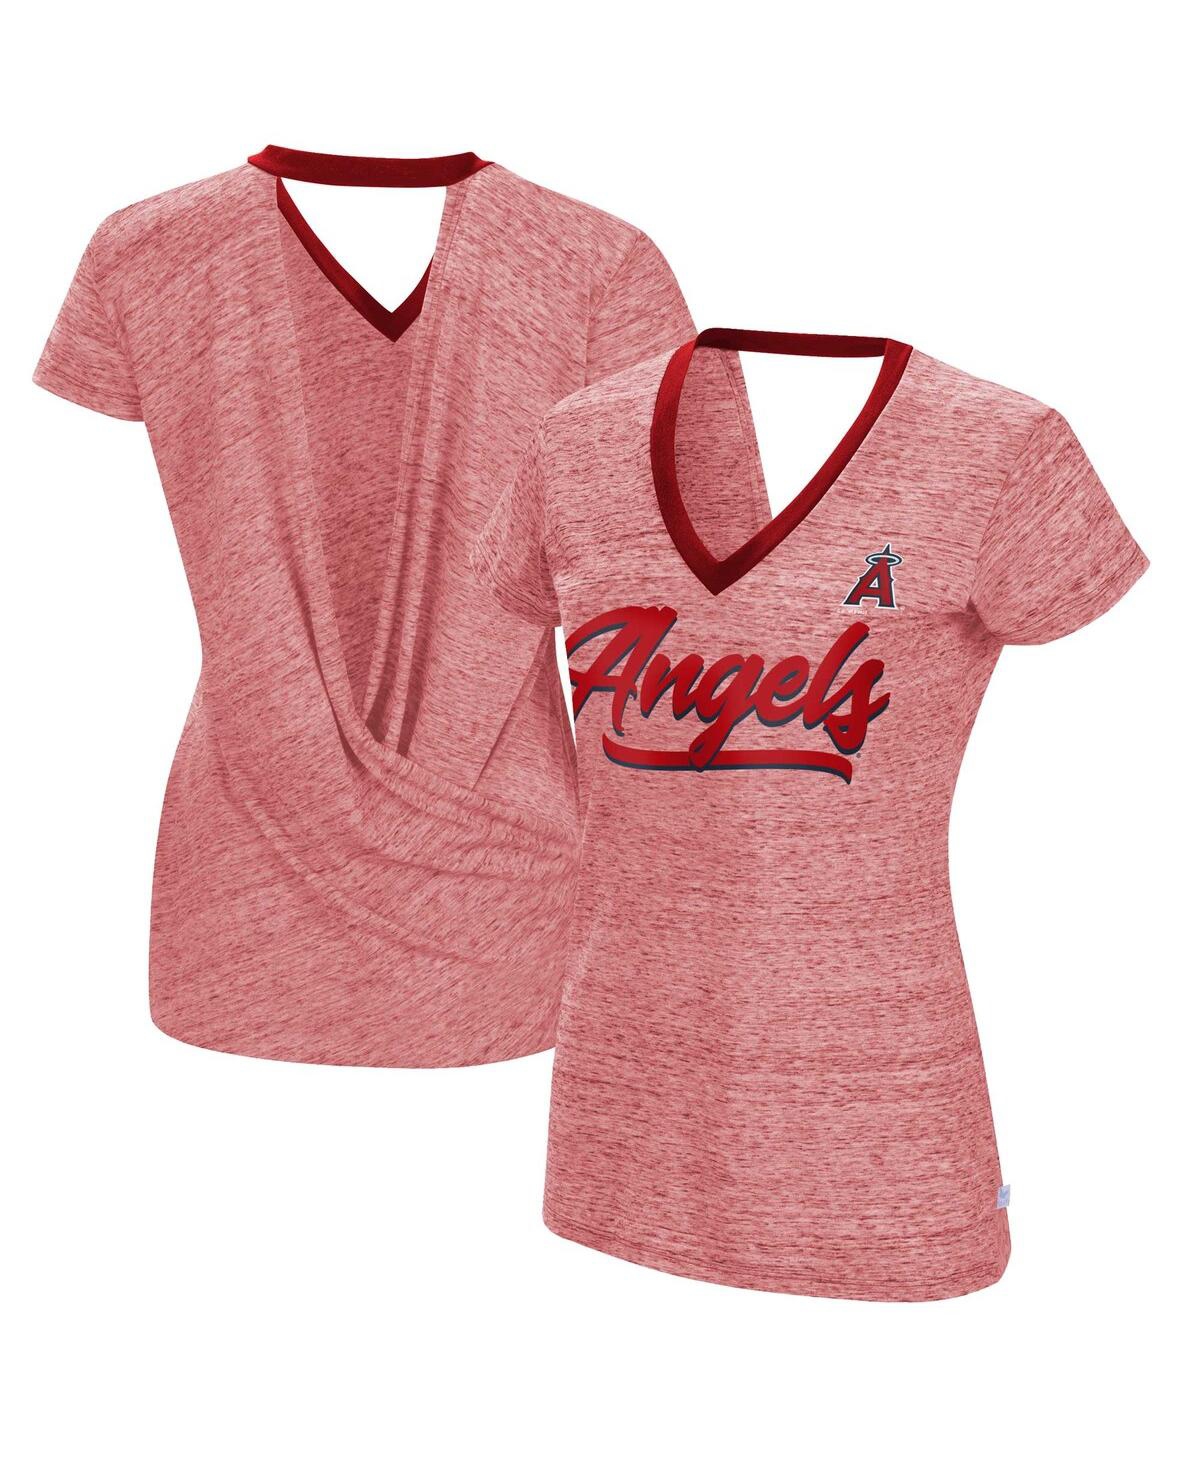 Women's Touch Red Los Angeles Angels Halftime Back Wrap Top V-Neck T-shirt - Red